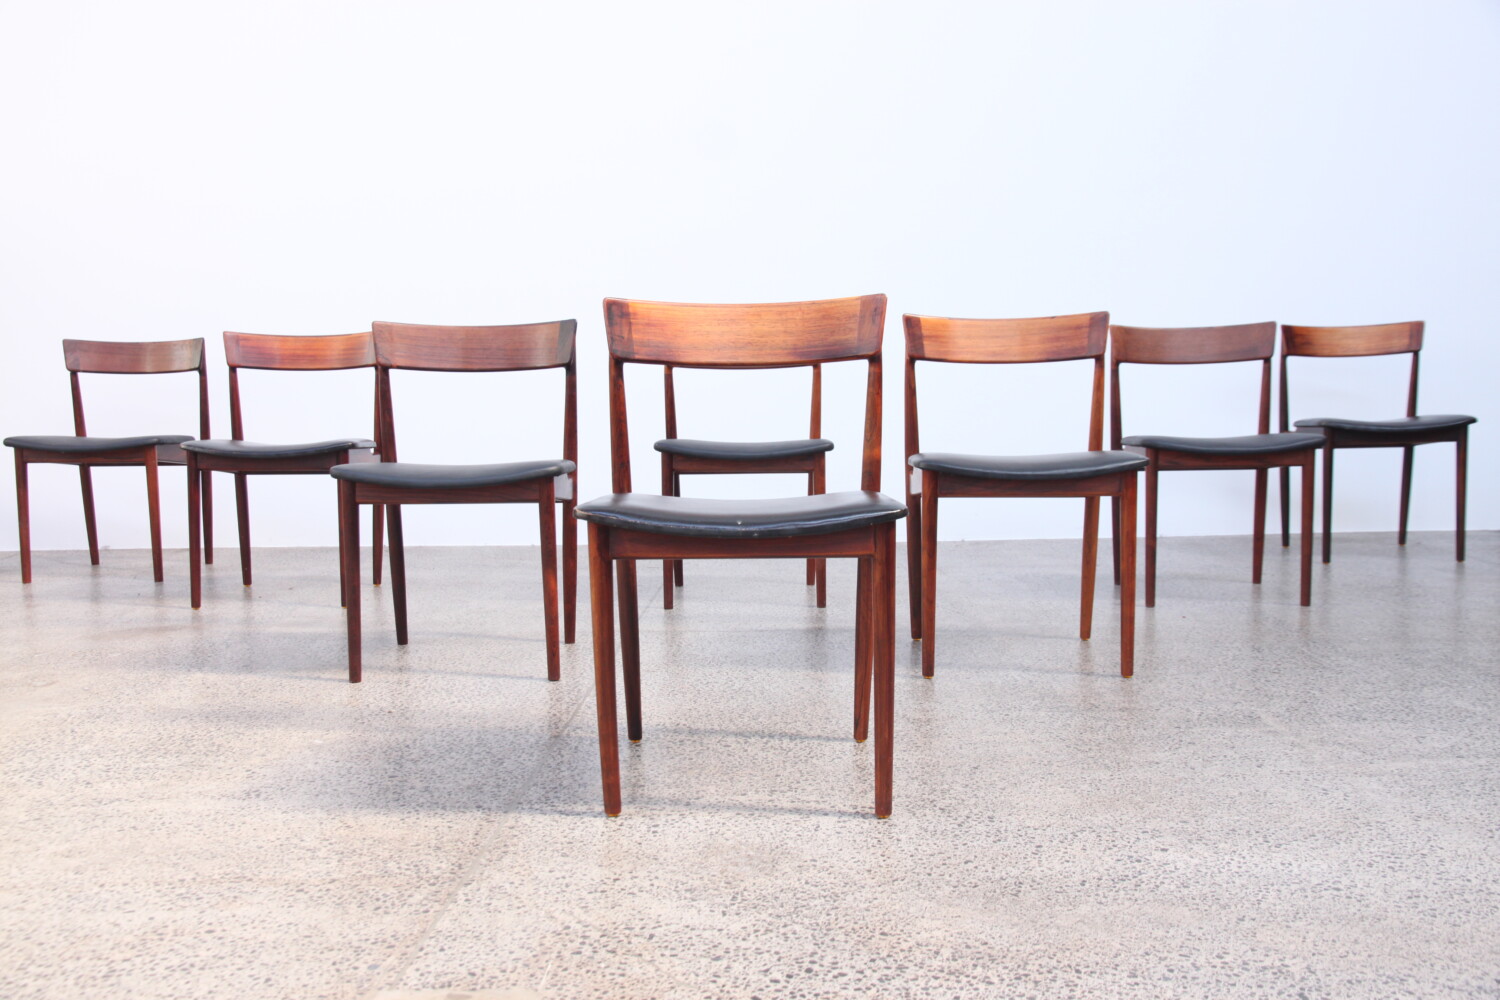 Rosewood and Leather Dining Chairs by Rosengren Hansen